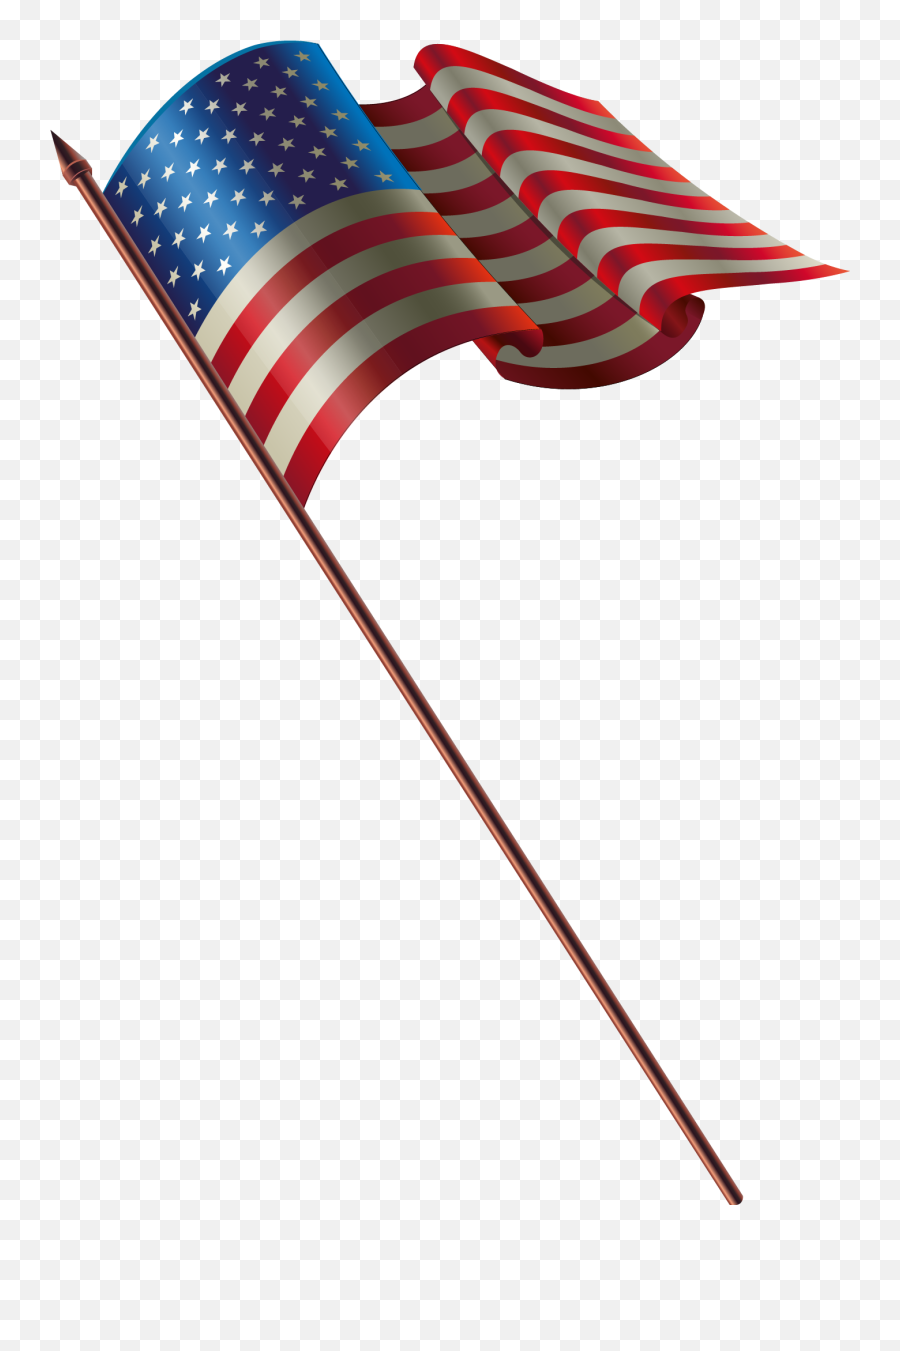 America Clipart American Freedom - Flag Of The United States Transparent Background Flag On Pole Emoji,America Clipart